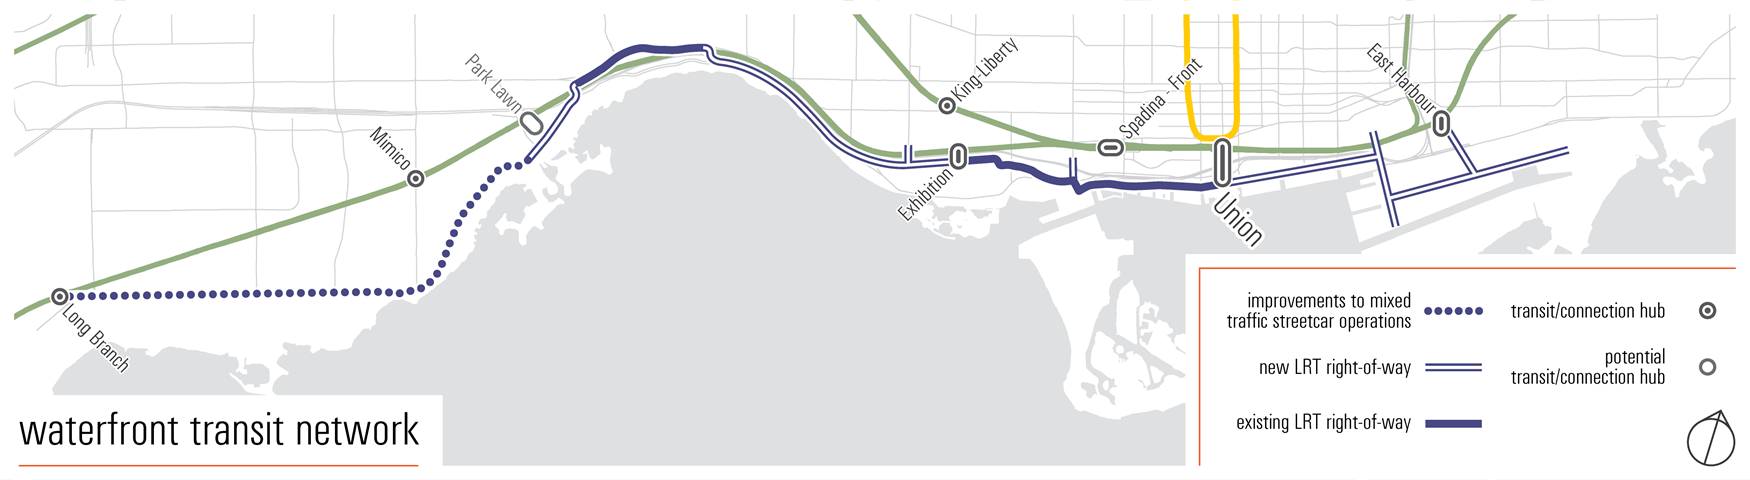 How to get to Long Branch Loop in Toronto by Bus, Train or Streetcar?